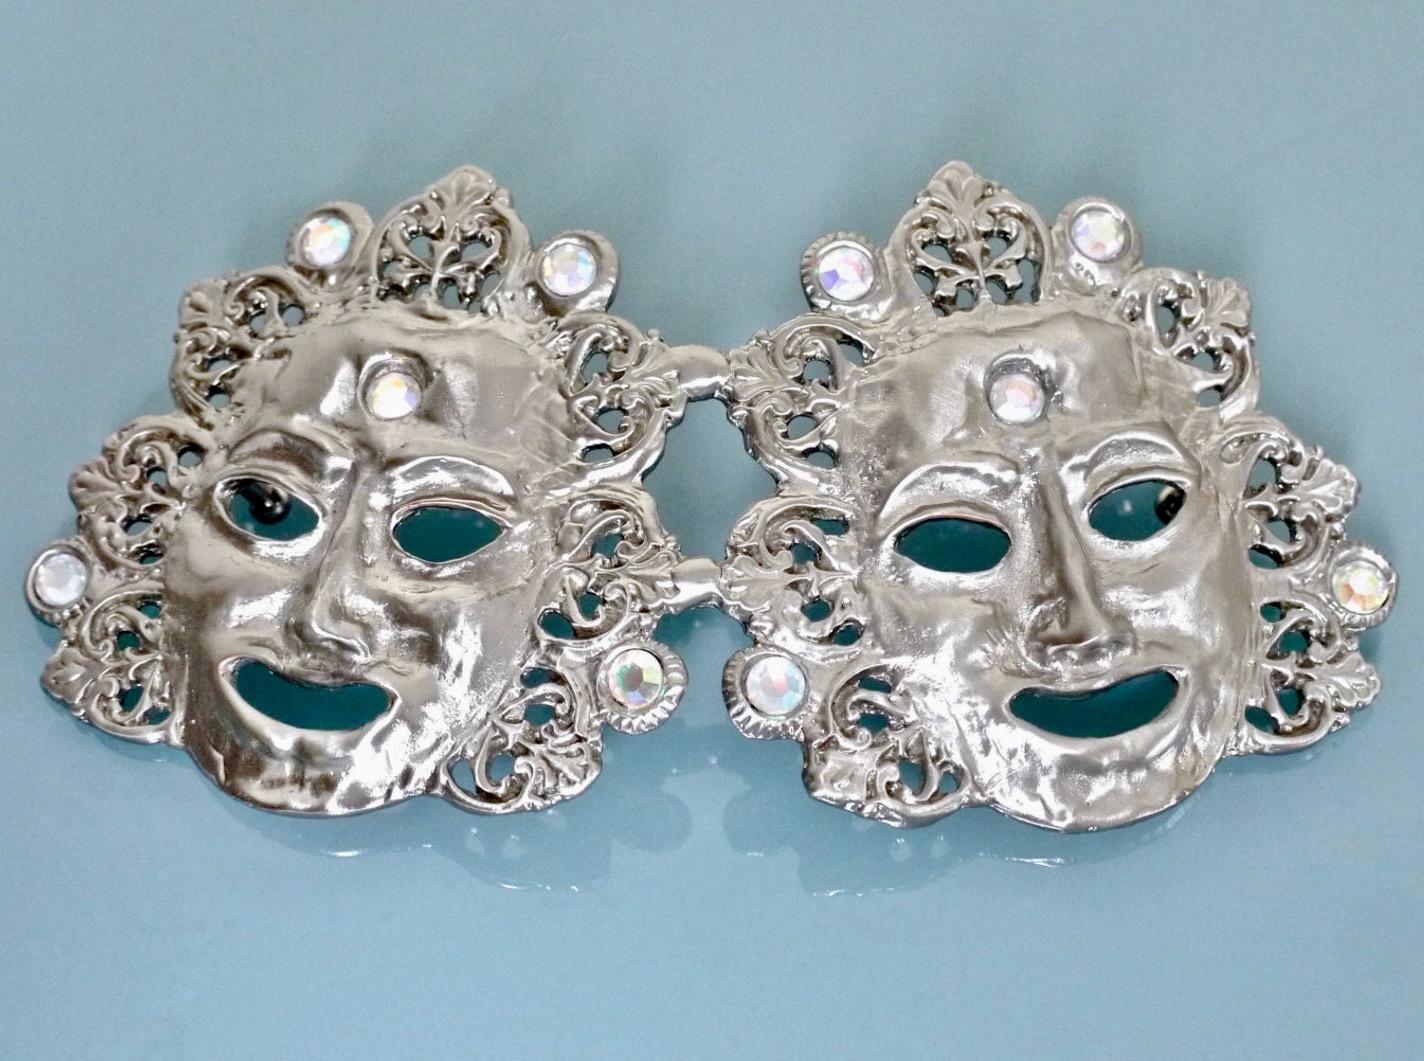 RARE LALOON Mask Belt

Measurements:
Length: 7 inches ( longest part )
Height: 3. 6/8 inches ( widest part )

Features:
- Massive detailed sculptured buckle in silver.
- Each mask is surrounded with baroque details and adorned with clear